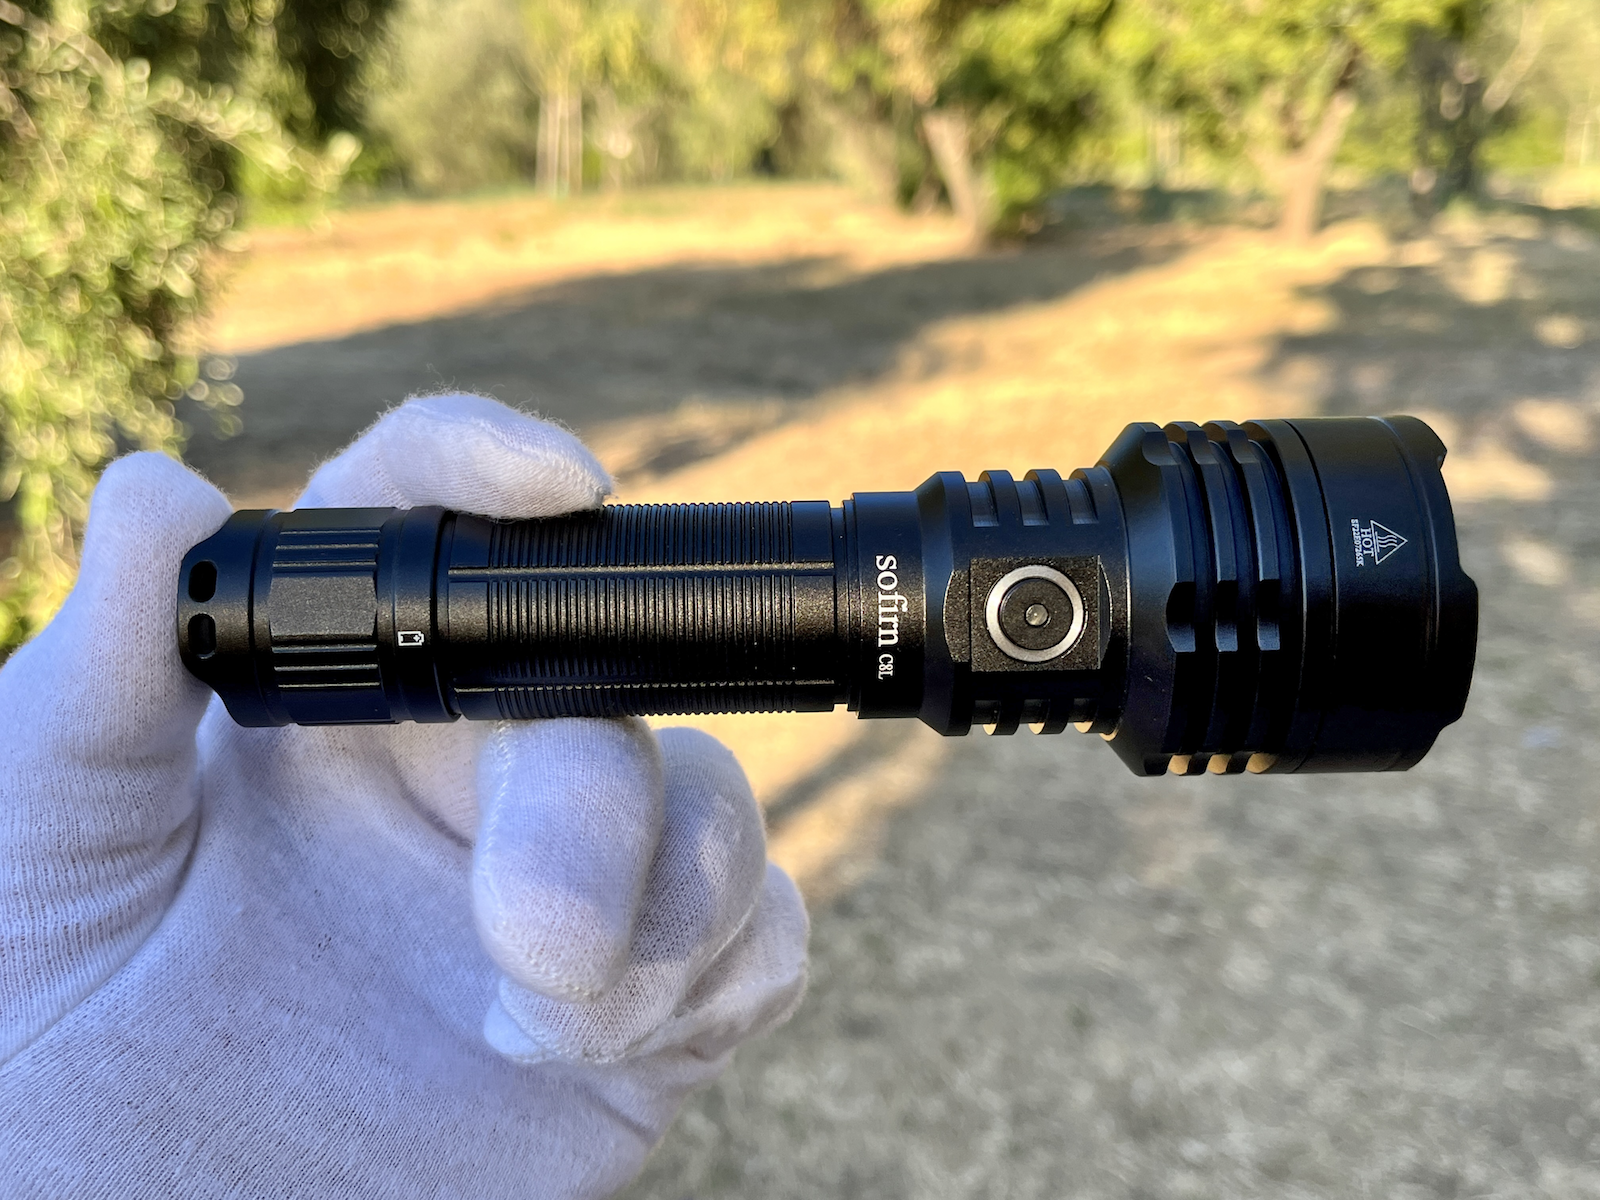 Sofirn C8L review, Thrower flashlight with 3,000 lumens and 70 kcd throw